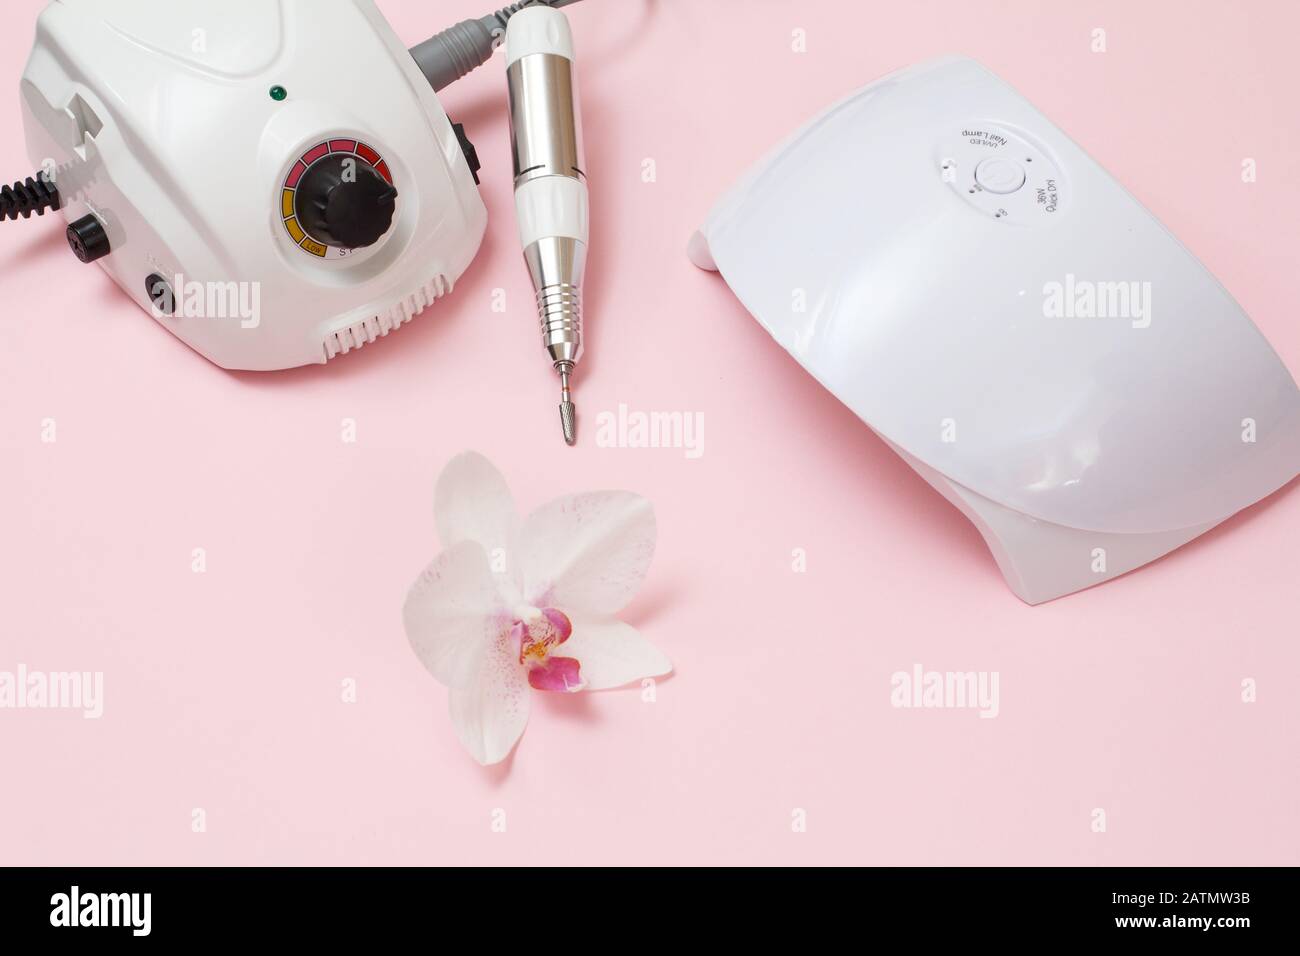 Milling cutter, led UV lamp and orchid flower on a pink background. A set of cosmetic tools for professional hardware manicure. Top view Stock Photo